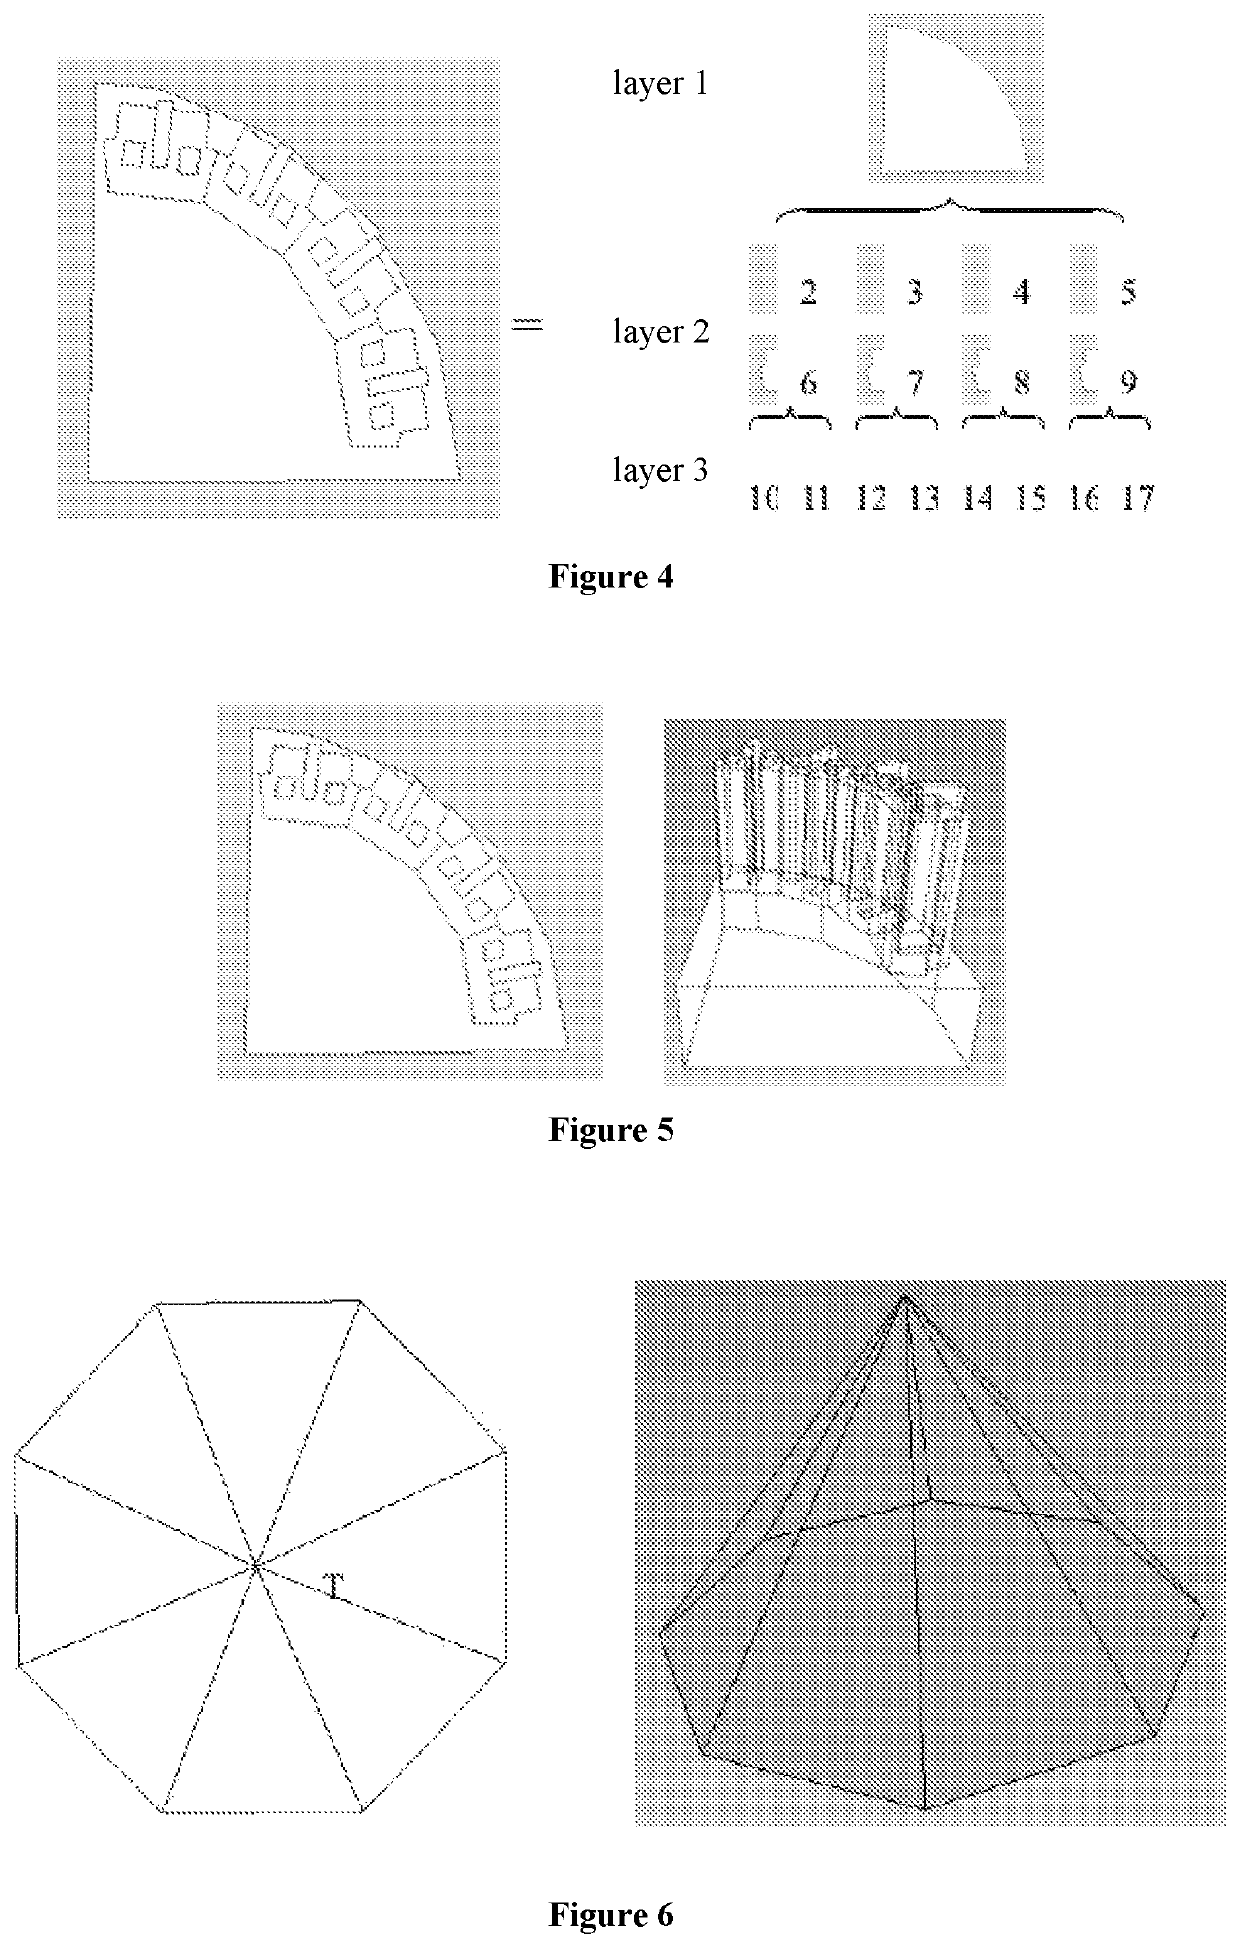 Method for automatic modeling of complex buildings with high accuracy